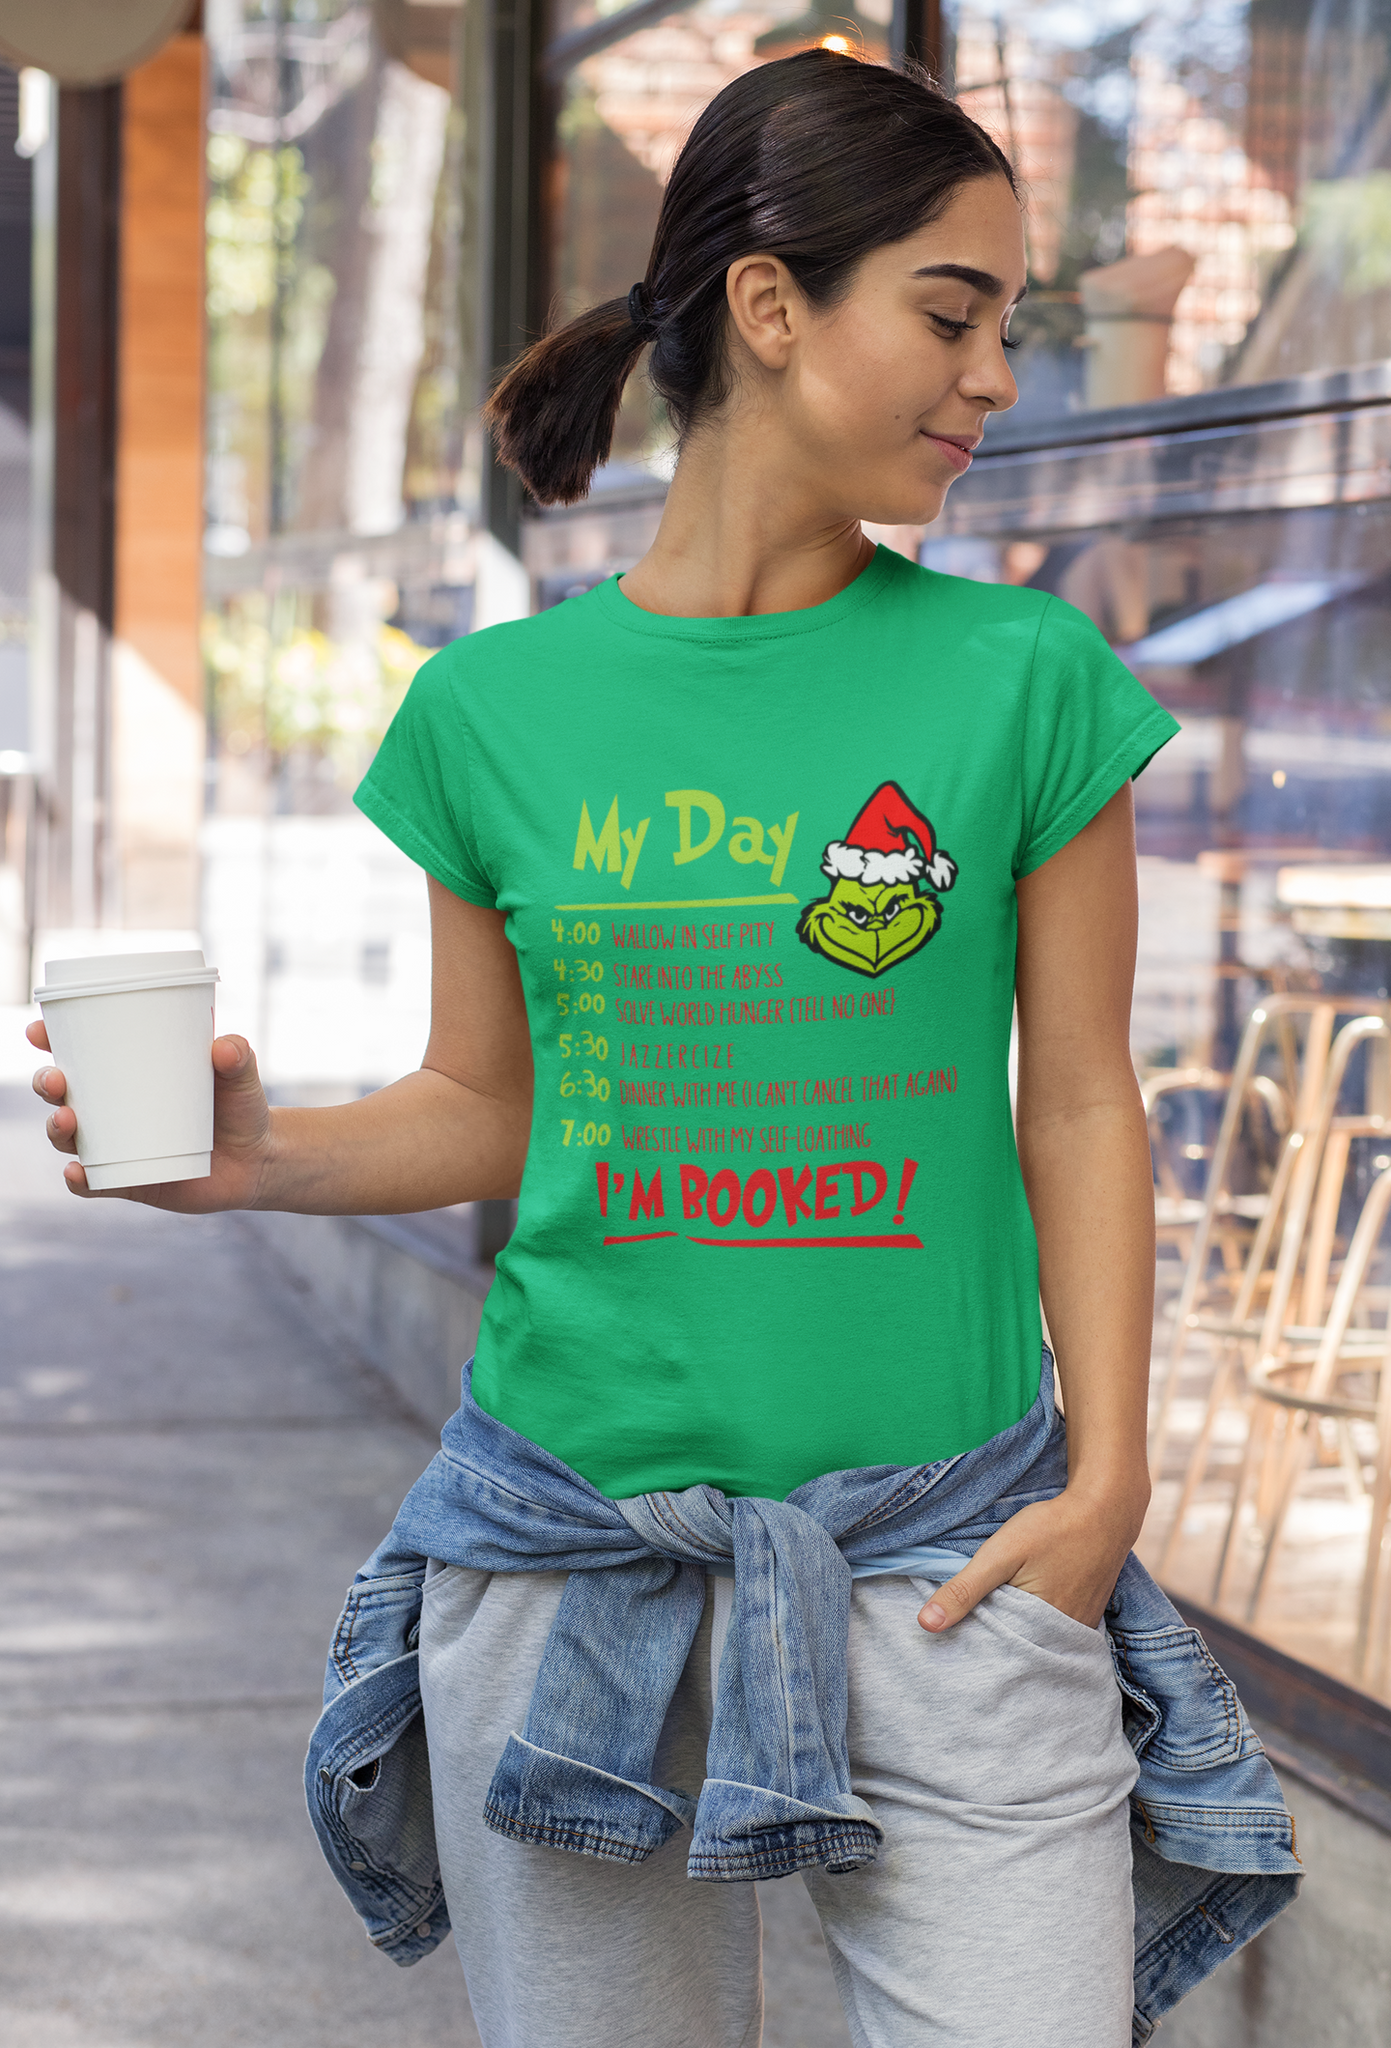 Grinch T Shirt, Grinch Timetable T Shirt, My Day Im Booked Tshirt, Christmas Movie Shirt, Christmas Gifts